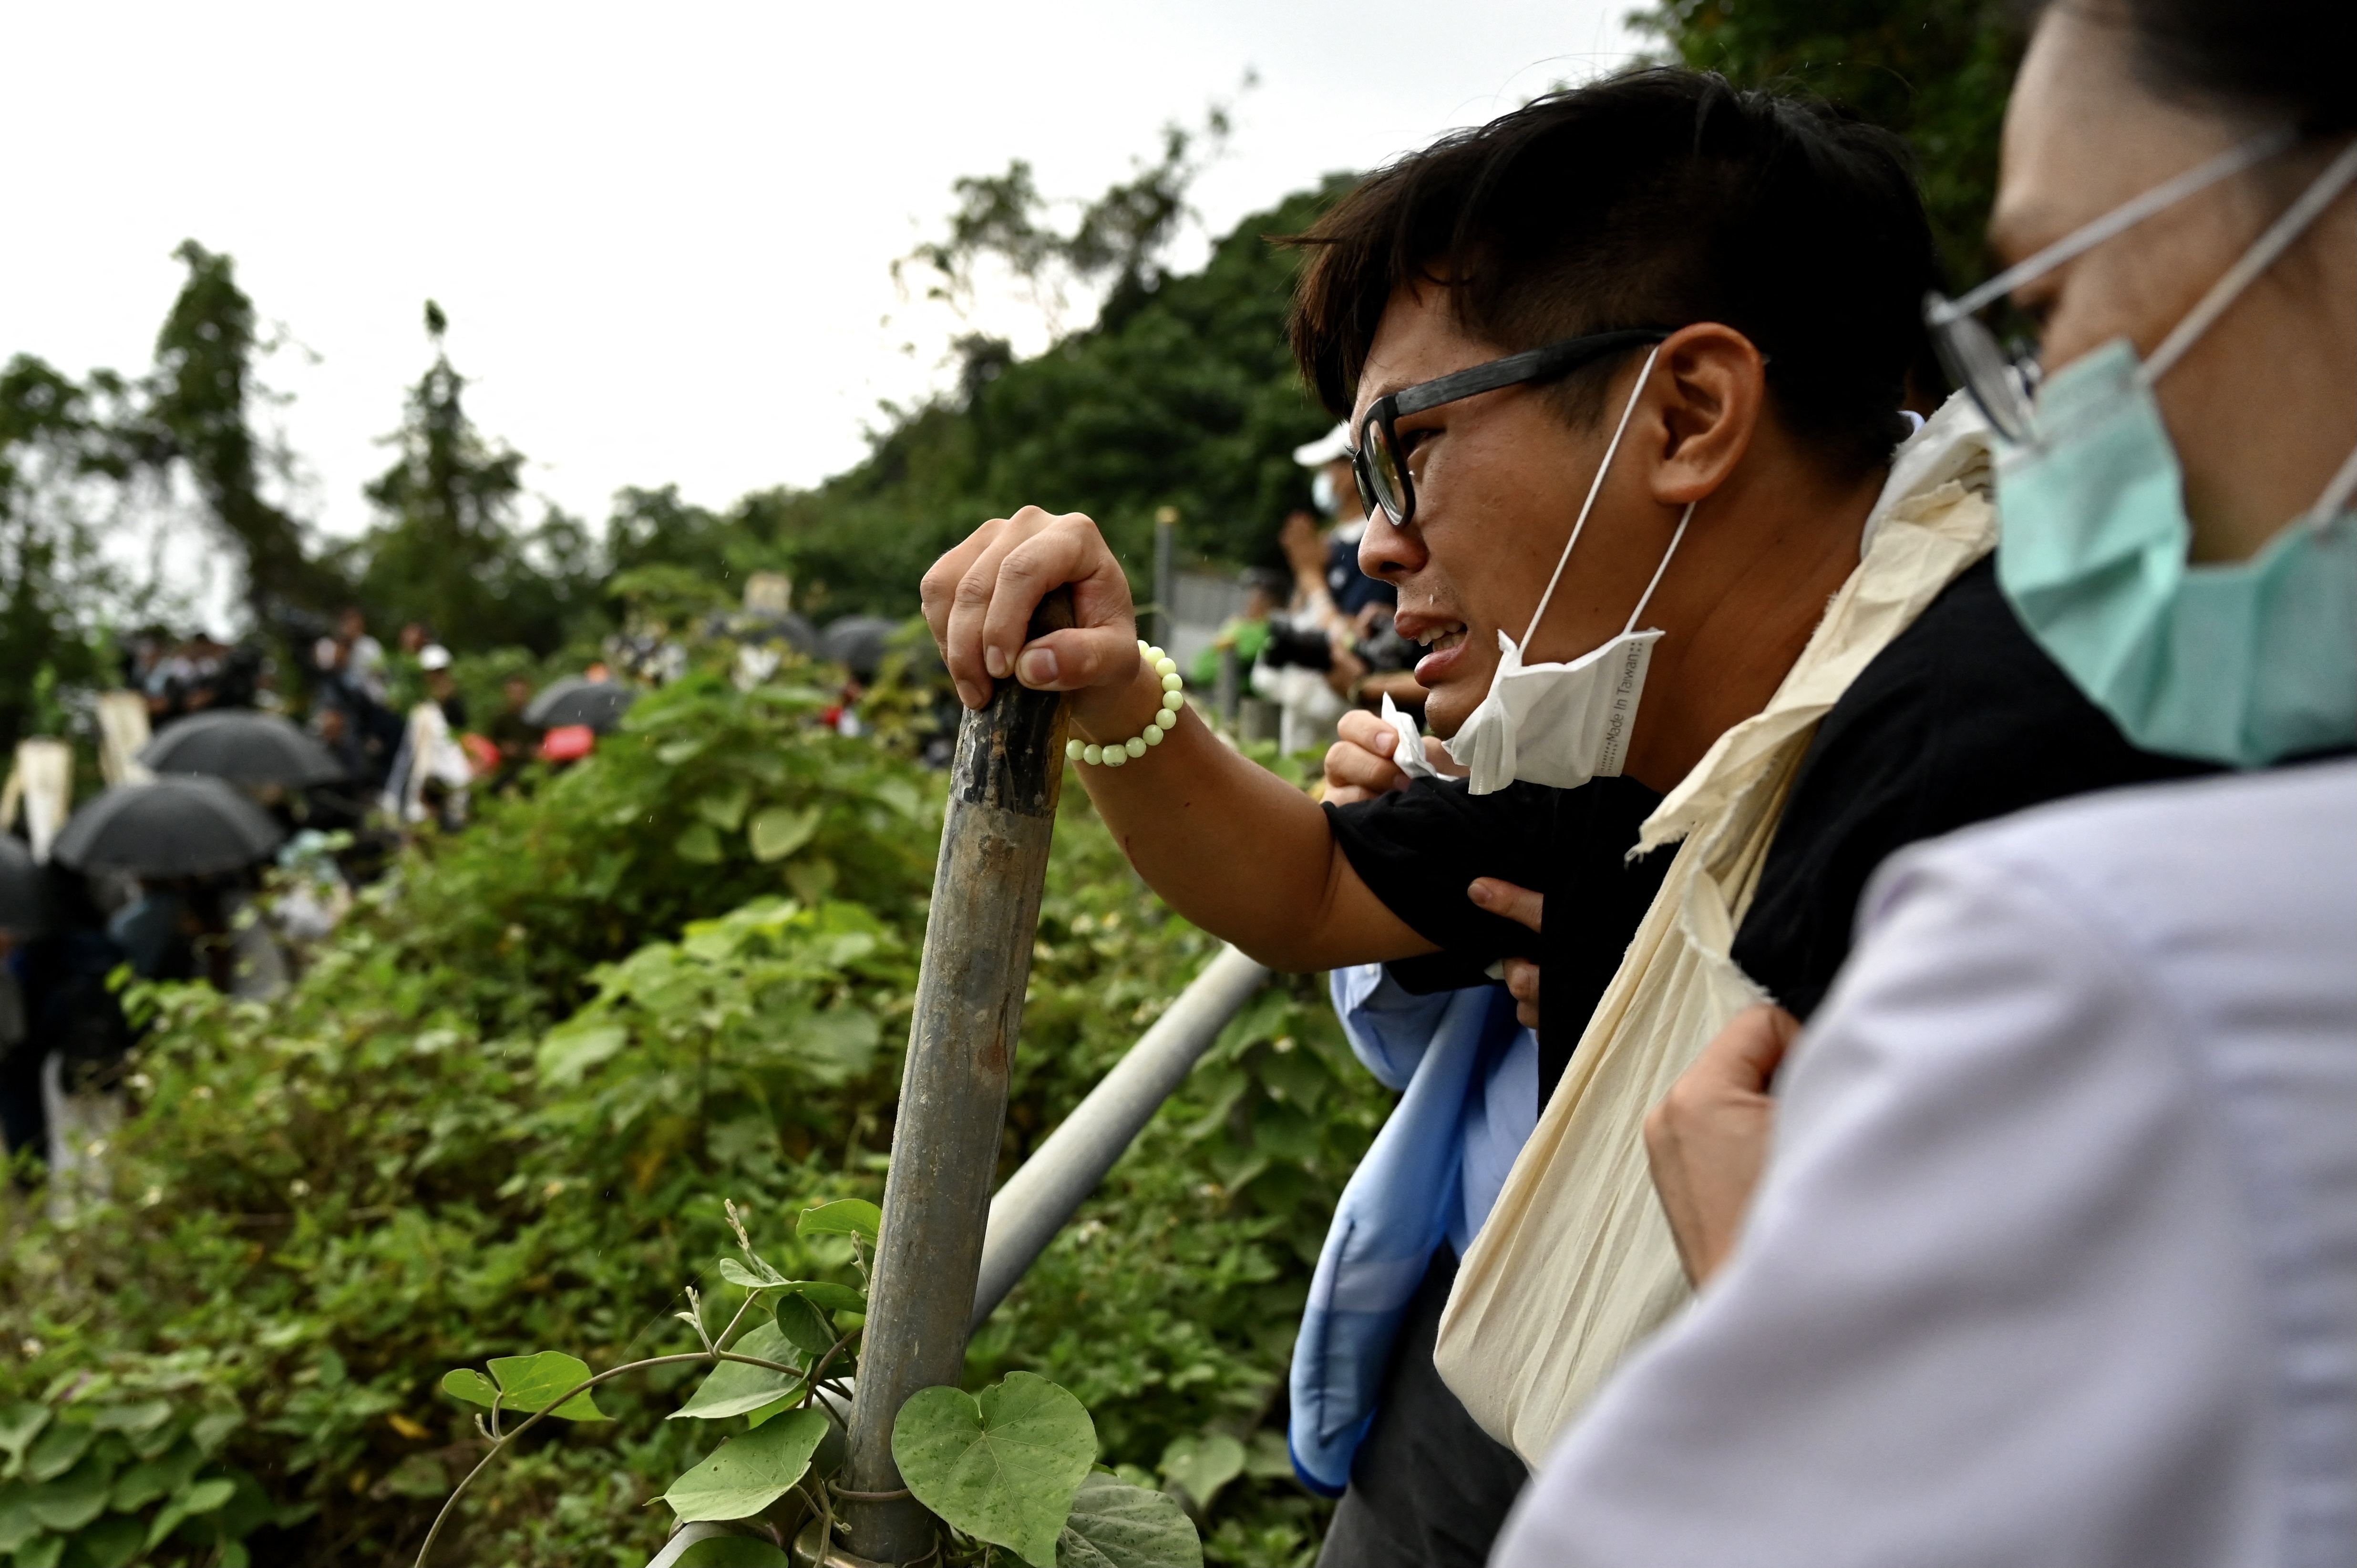 Relatives of the victims who died on the derailed train, pray at the accident site on the mountains of Hualien photo.